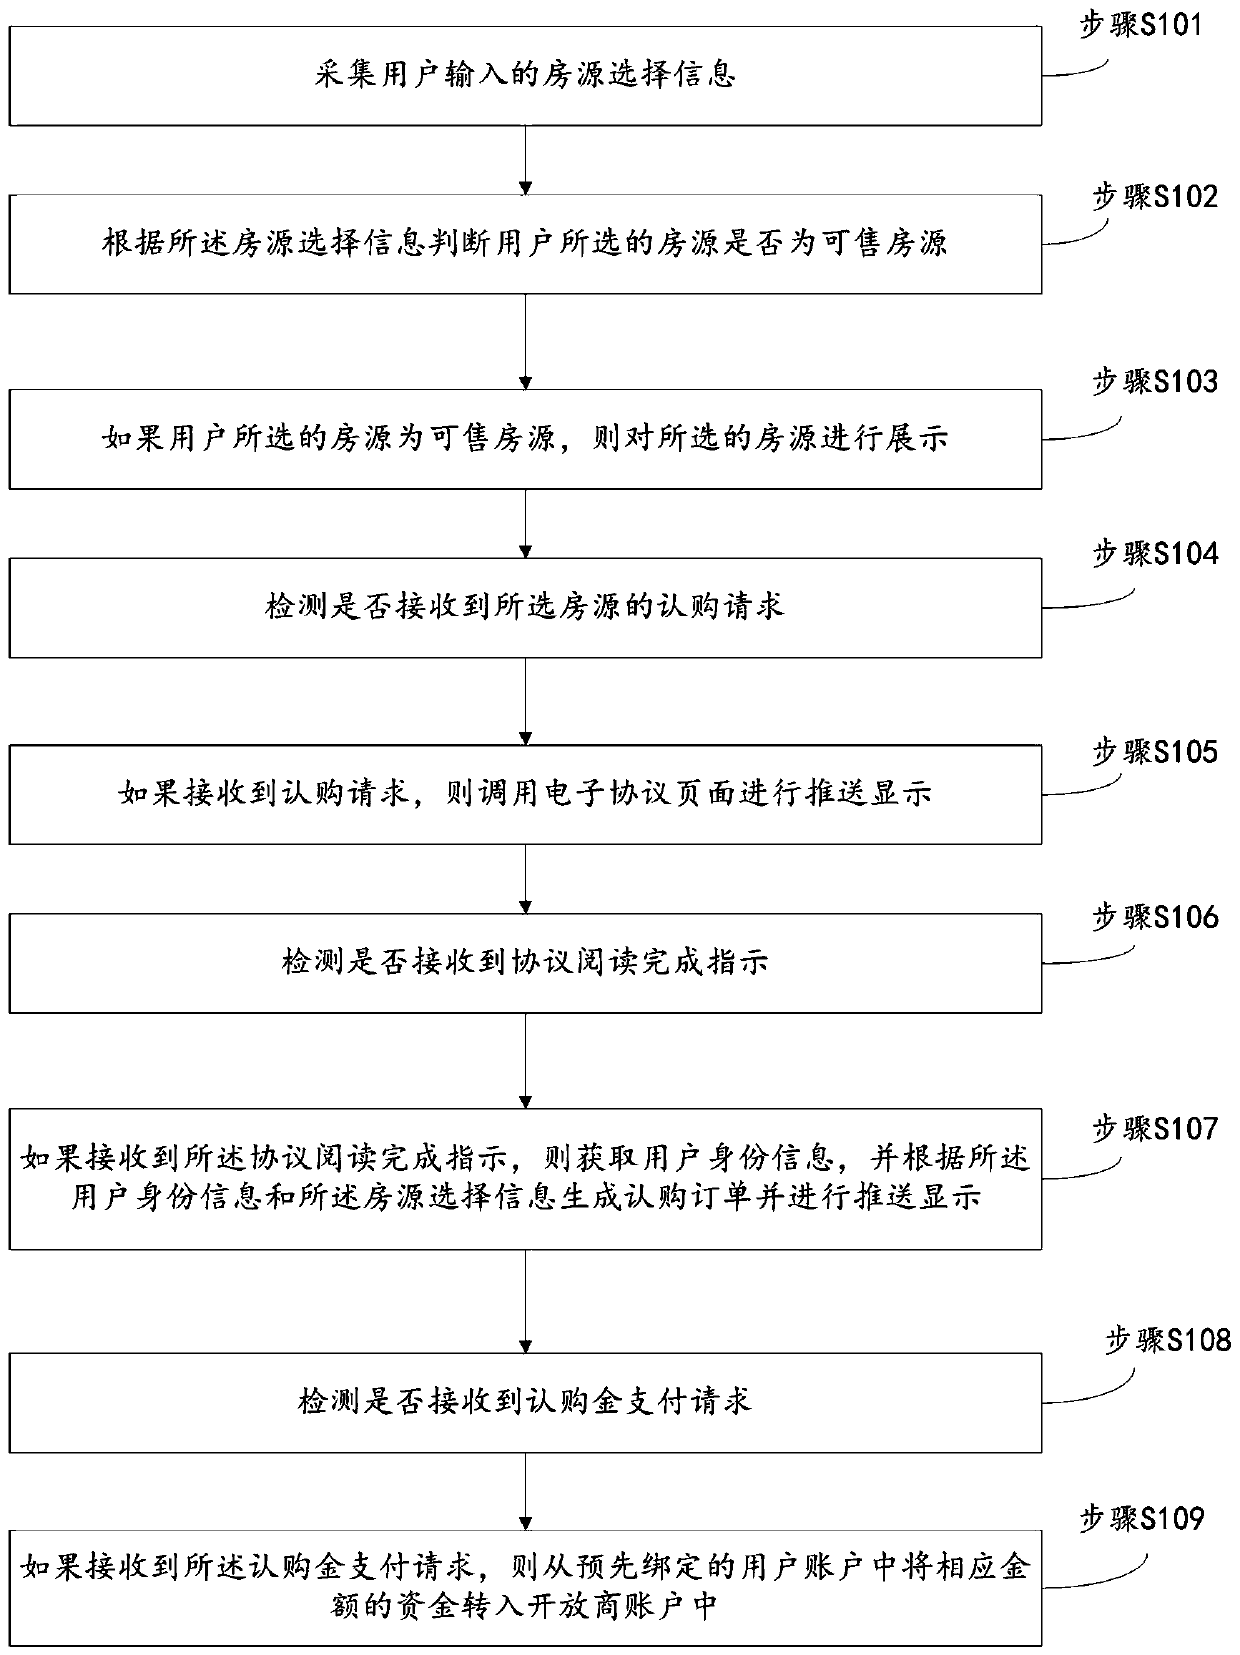 Online room determination information processing method and device, storage medium and mobile terminal